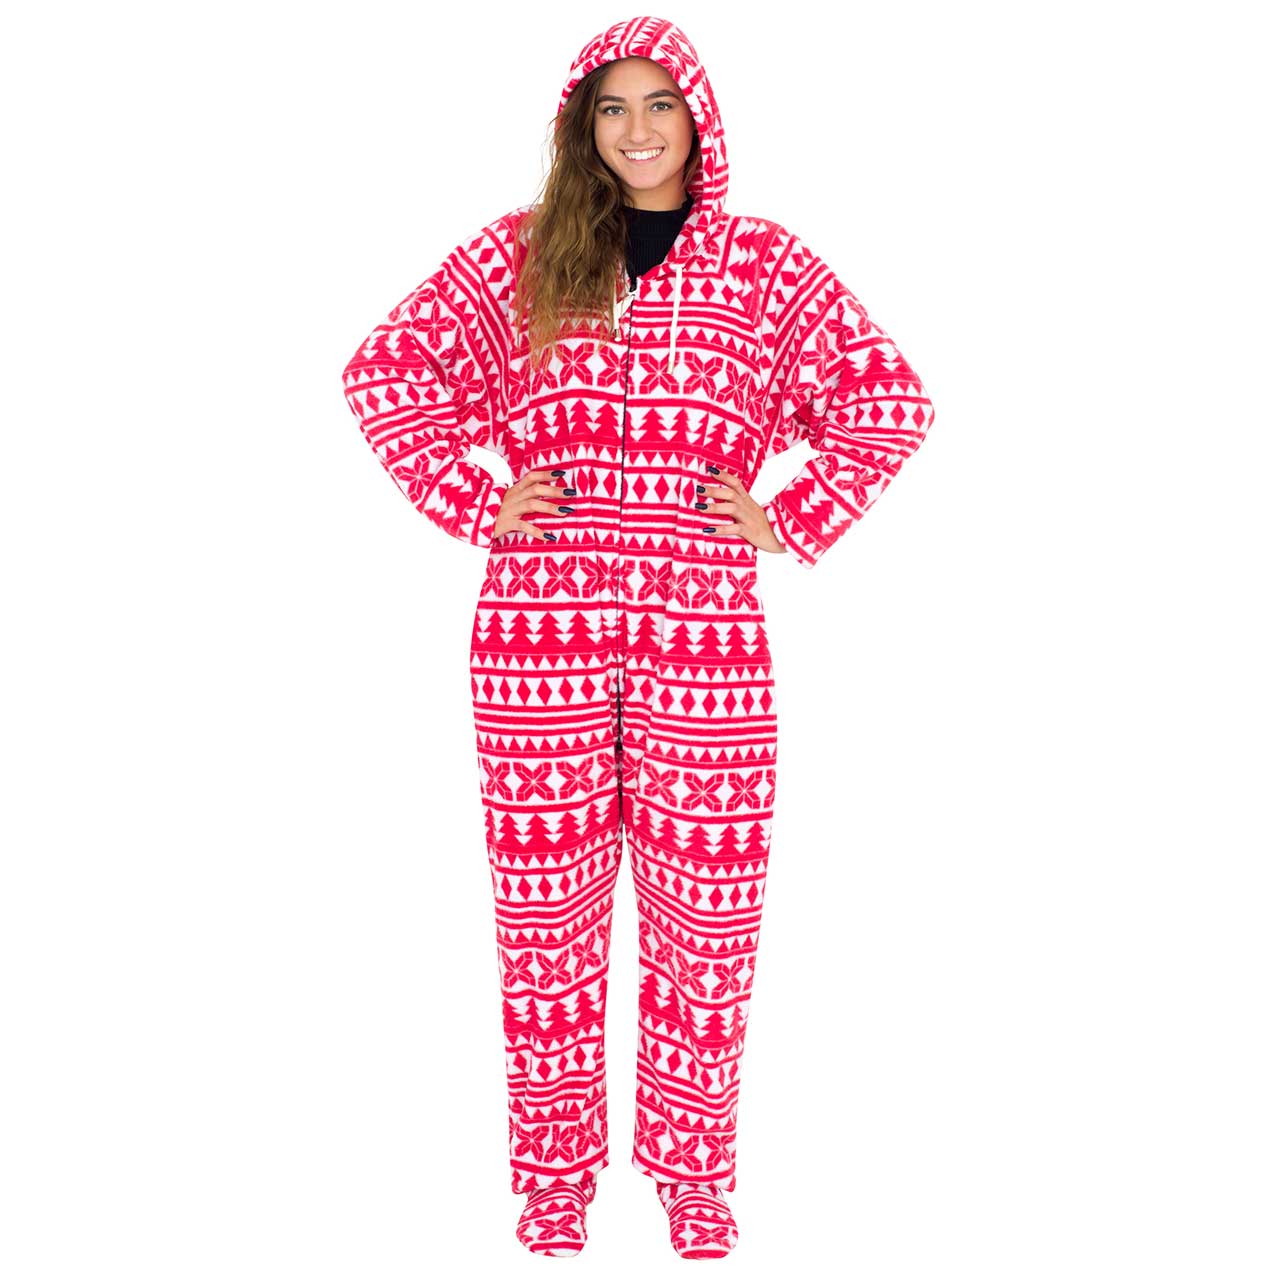 Red and White Ugly Christmas Pajama Suit with Hood,Specials : uglyschristmassweater.com